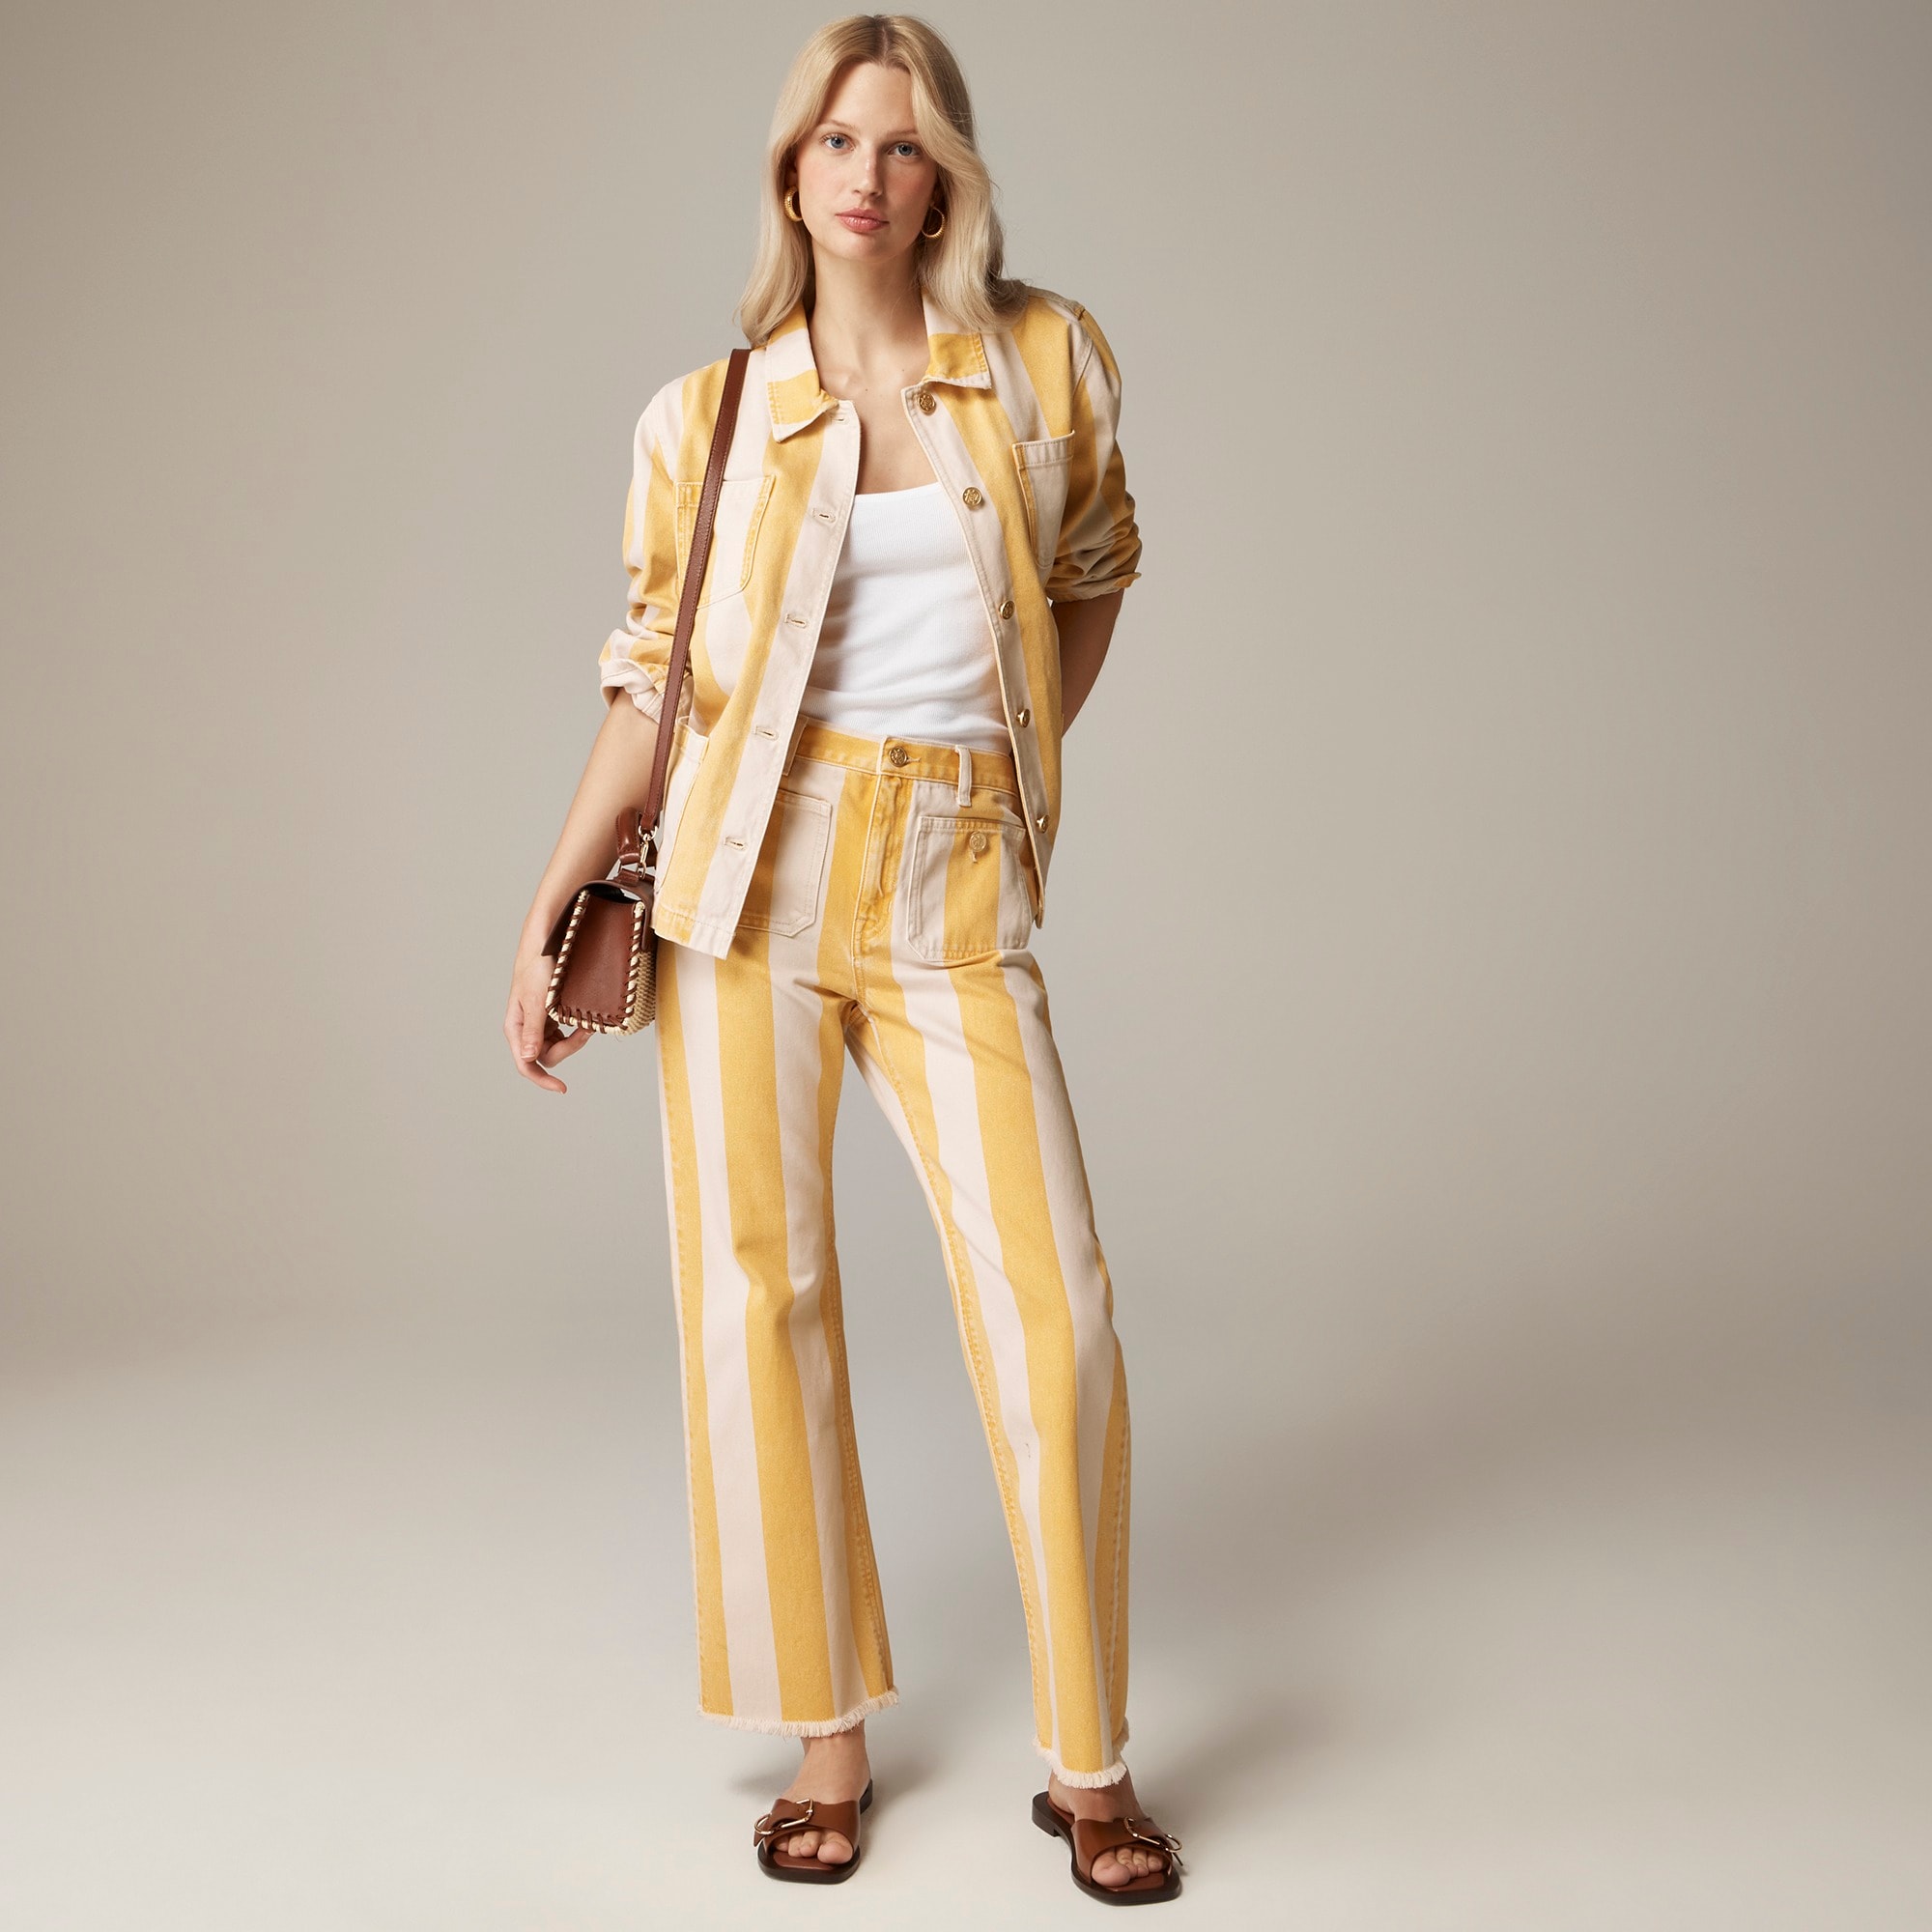  Sailor mid-rise relaxed demi-boot jean in sunflower stripe